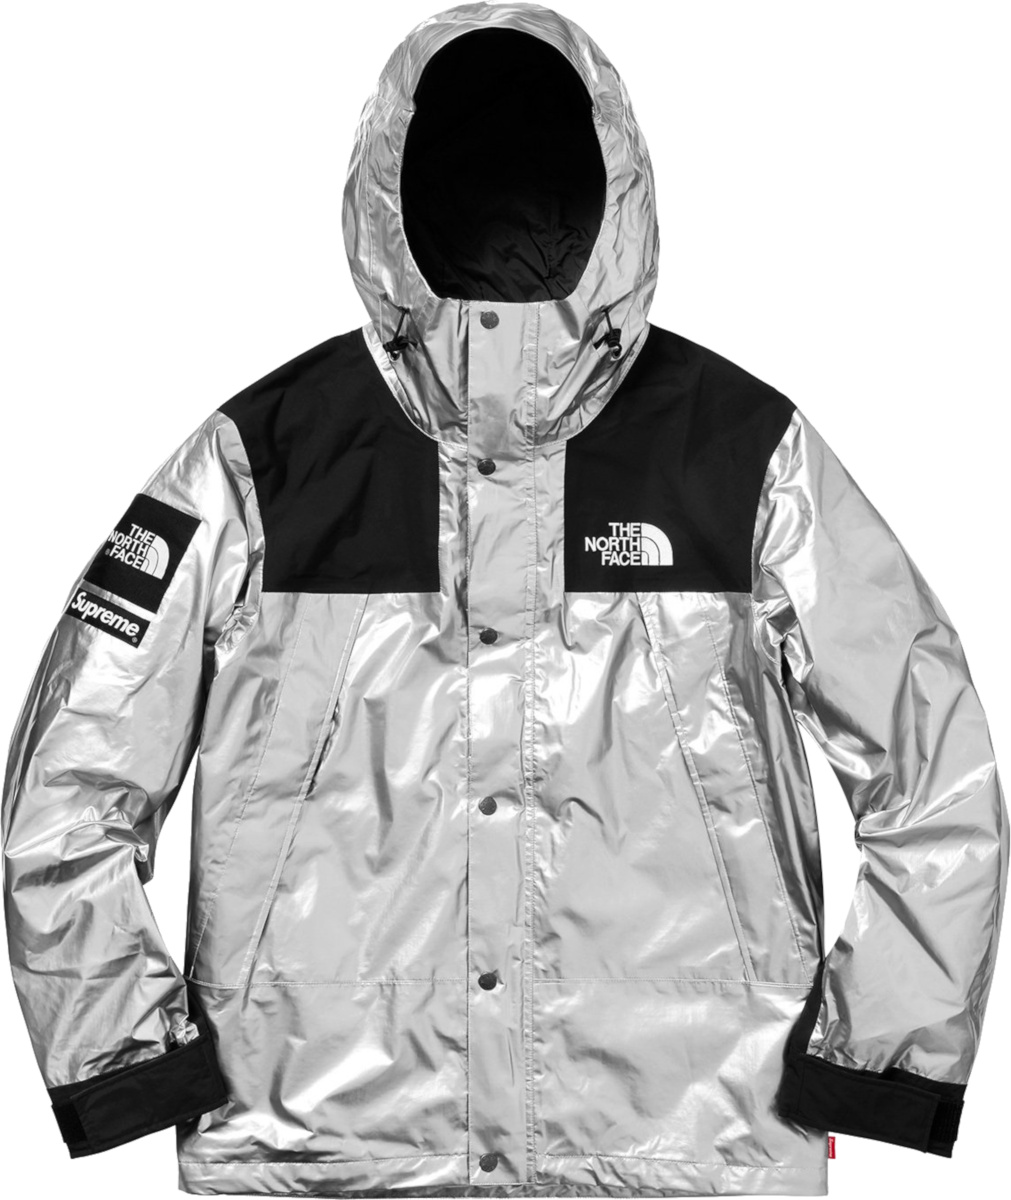 Supreme x The North Face Silver Metallic Jacket | Incorporated Style